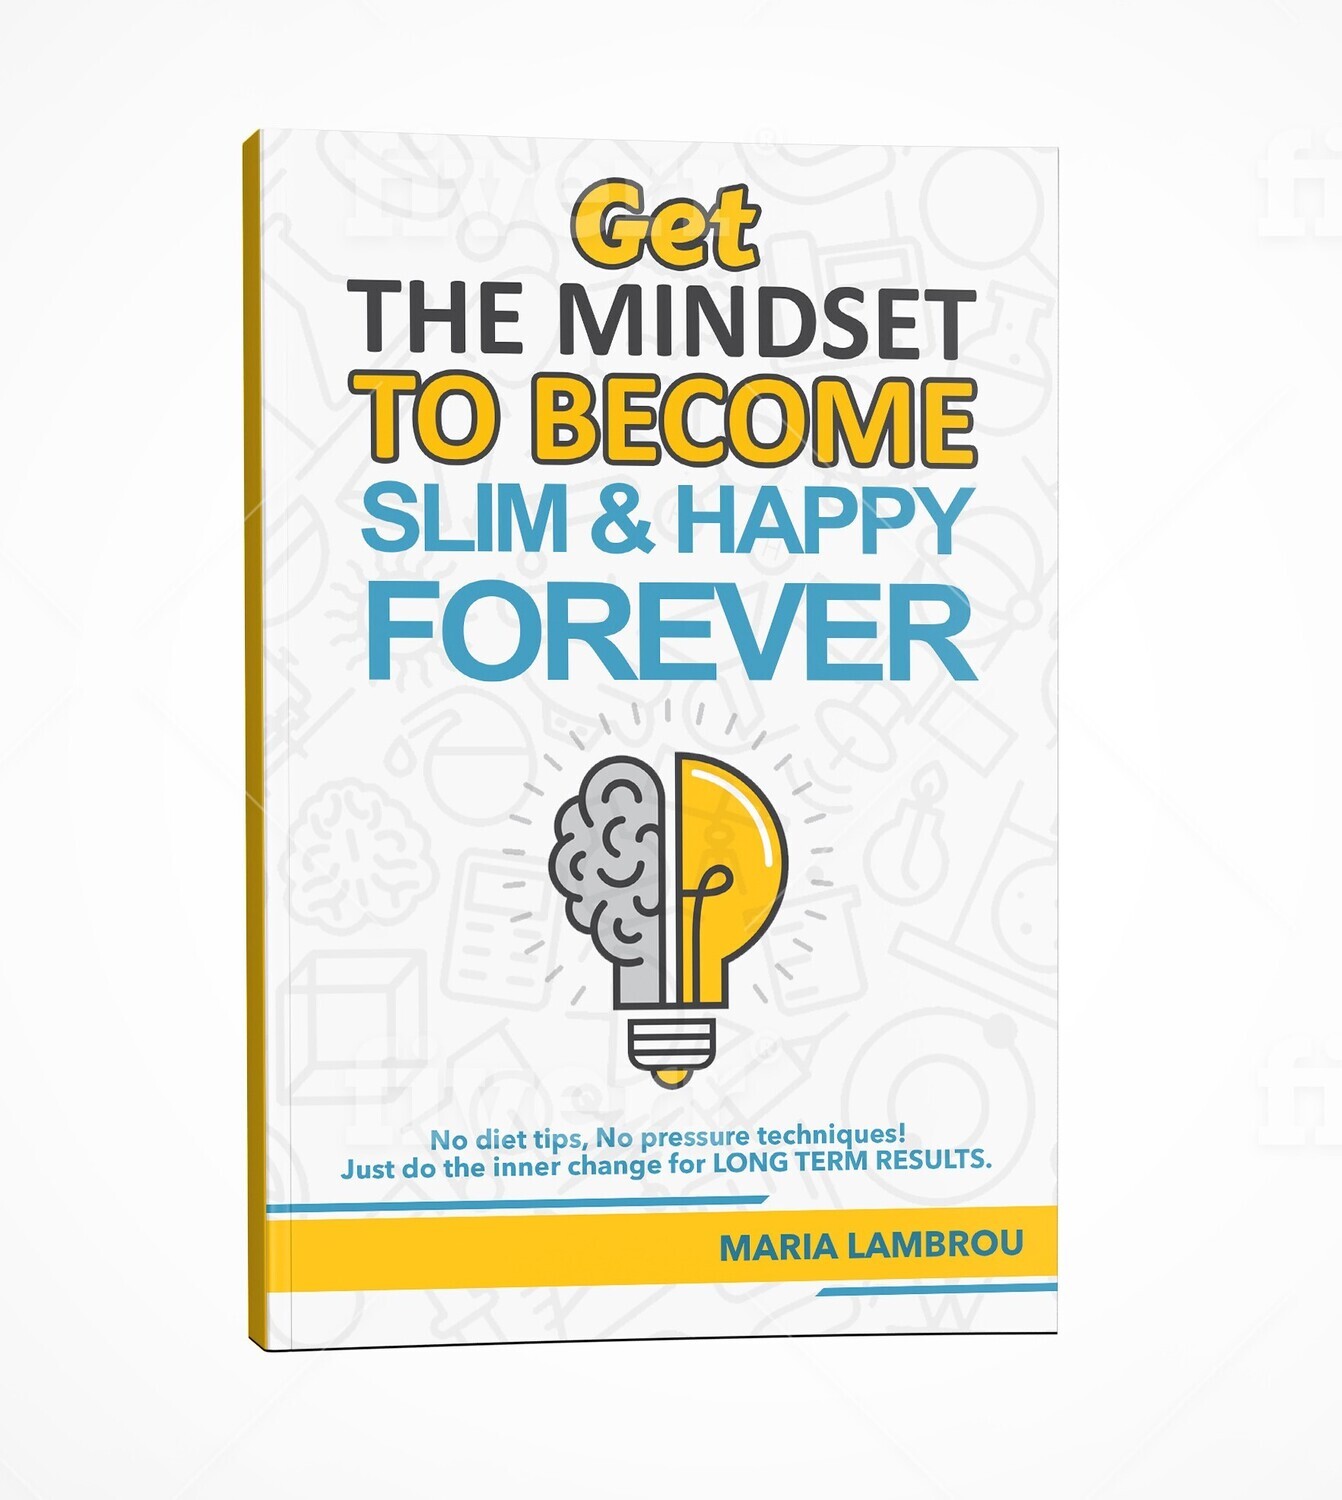 Get The Mindset To Become SLIM & HAPPY Forever!: No diet tips, No pressure techniques! Just do the inner change for LONG TERM RESULTS.  ebook in ENGLISH